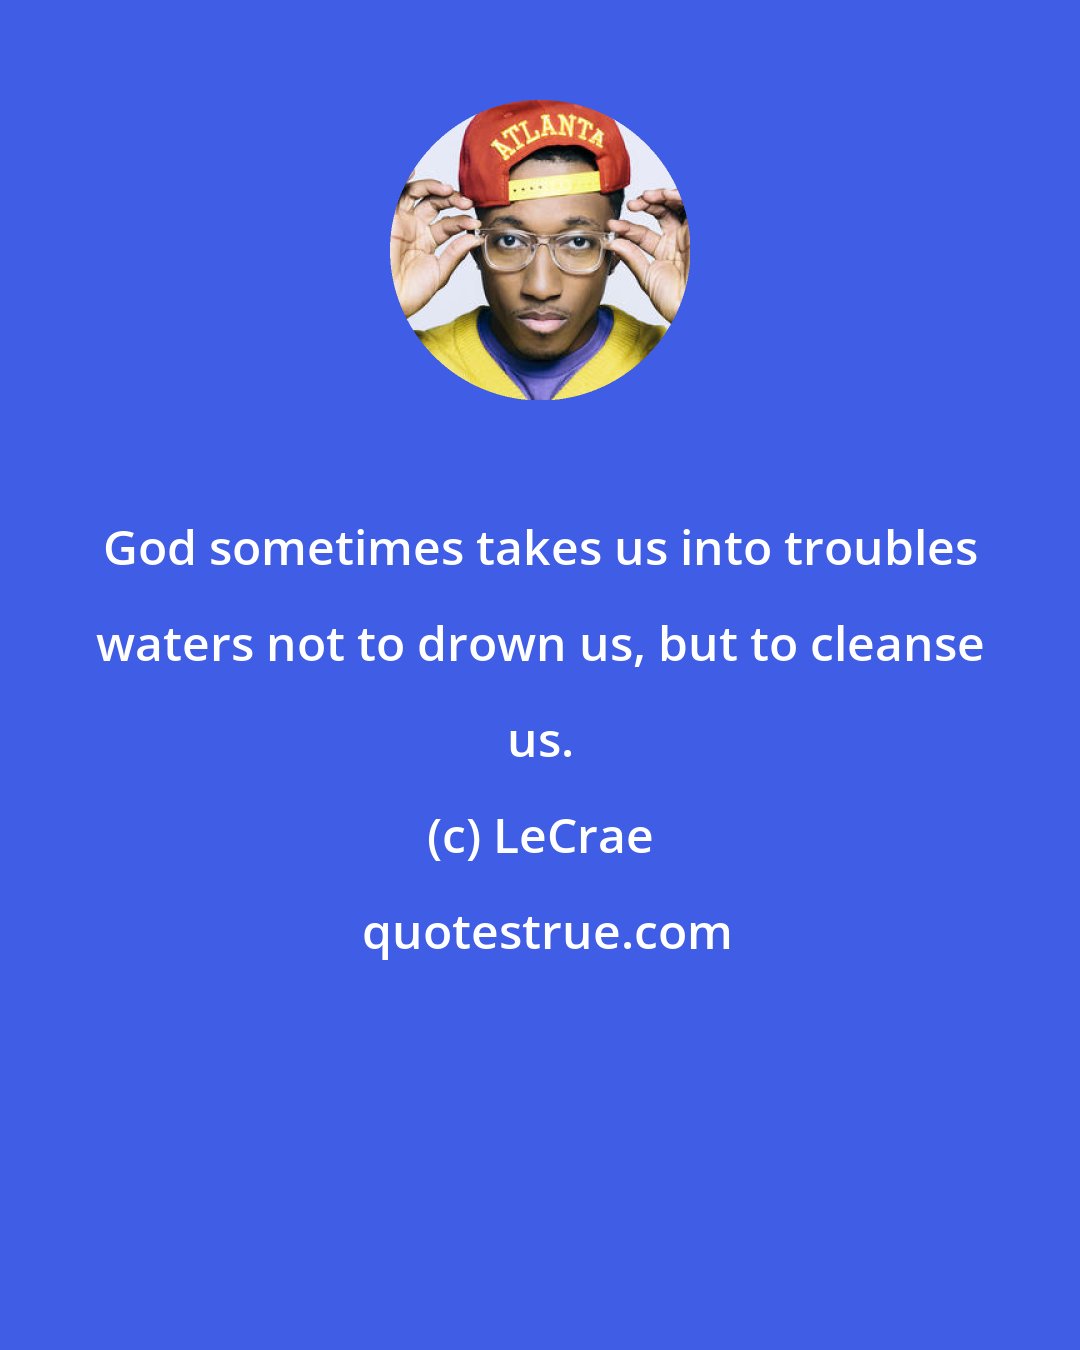 LeCrae: God sometimes takes us into troubles waters not to drown us, but to cleanse us.